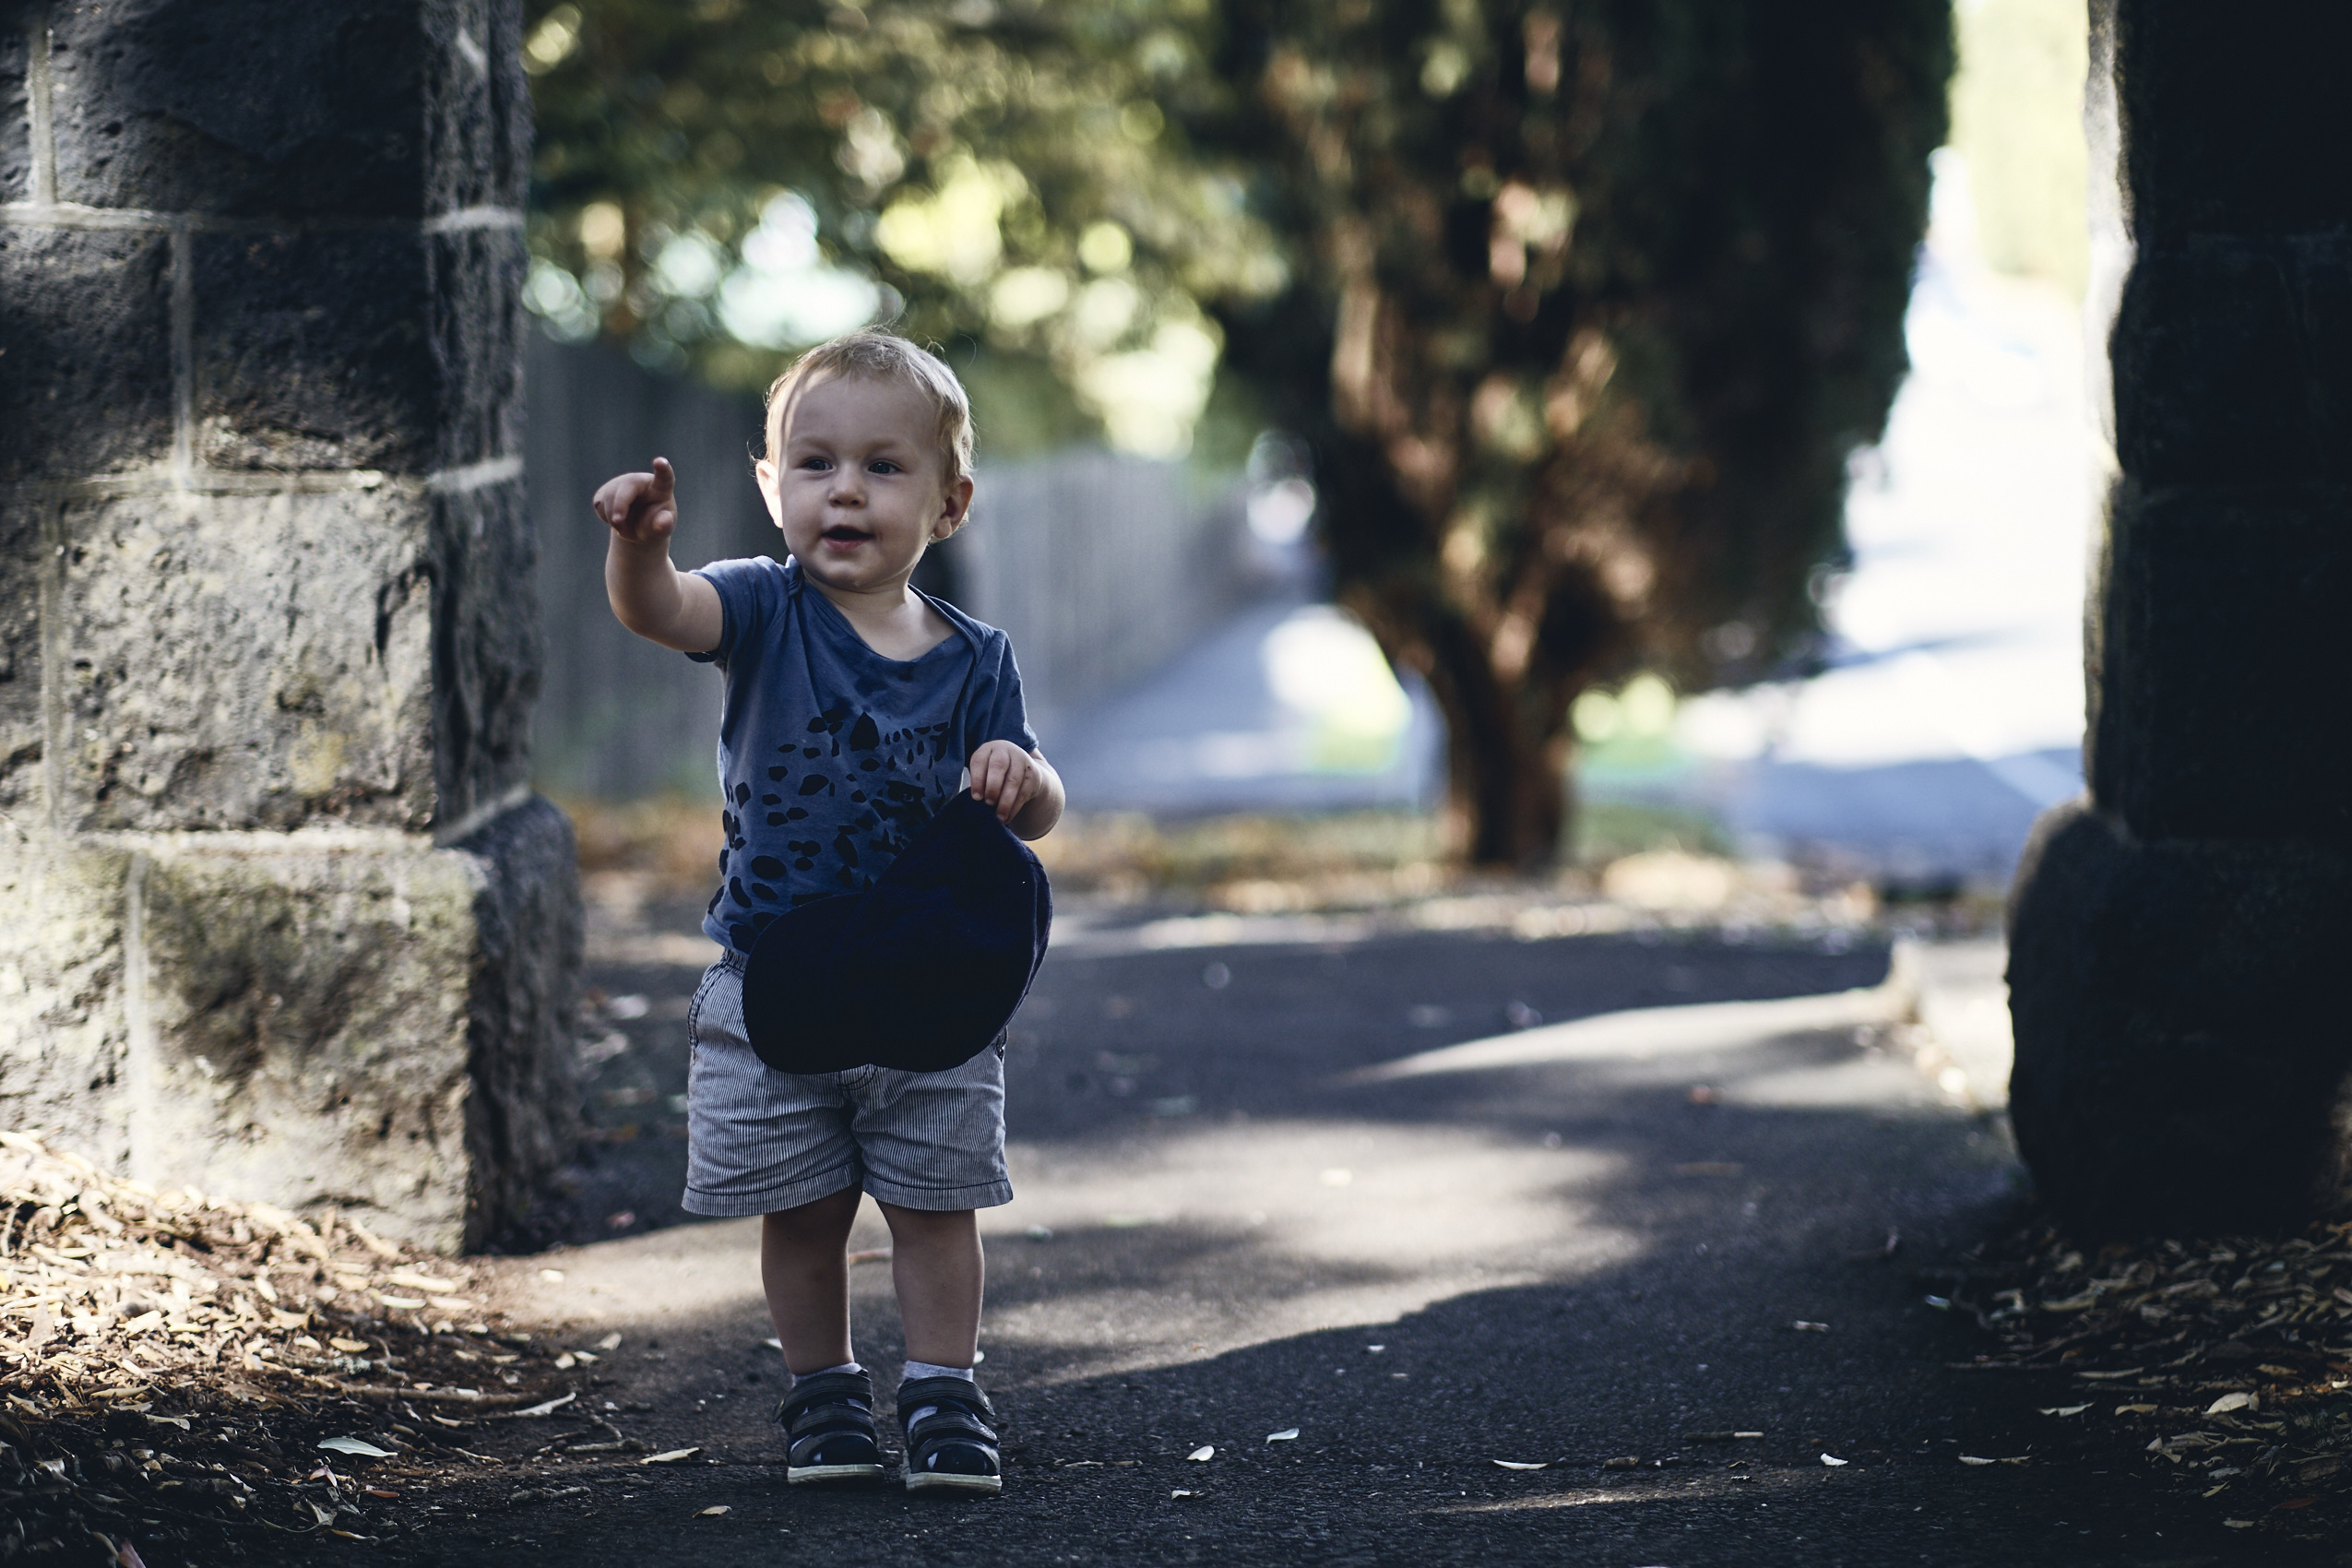 Lockdown • Young Boy Walking on Footpath Pointing • Lifestyle & Portrait Photography